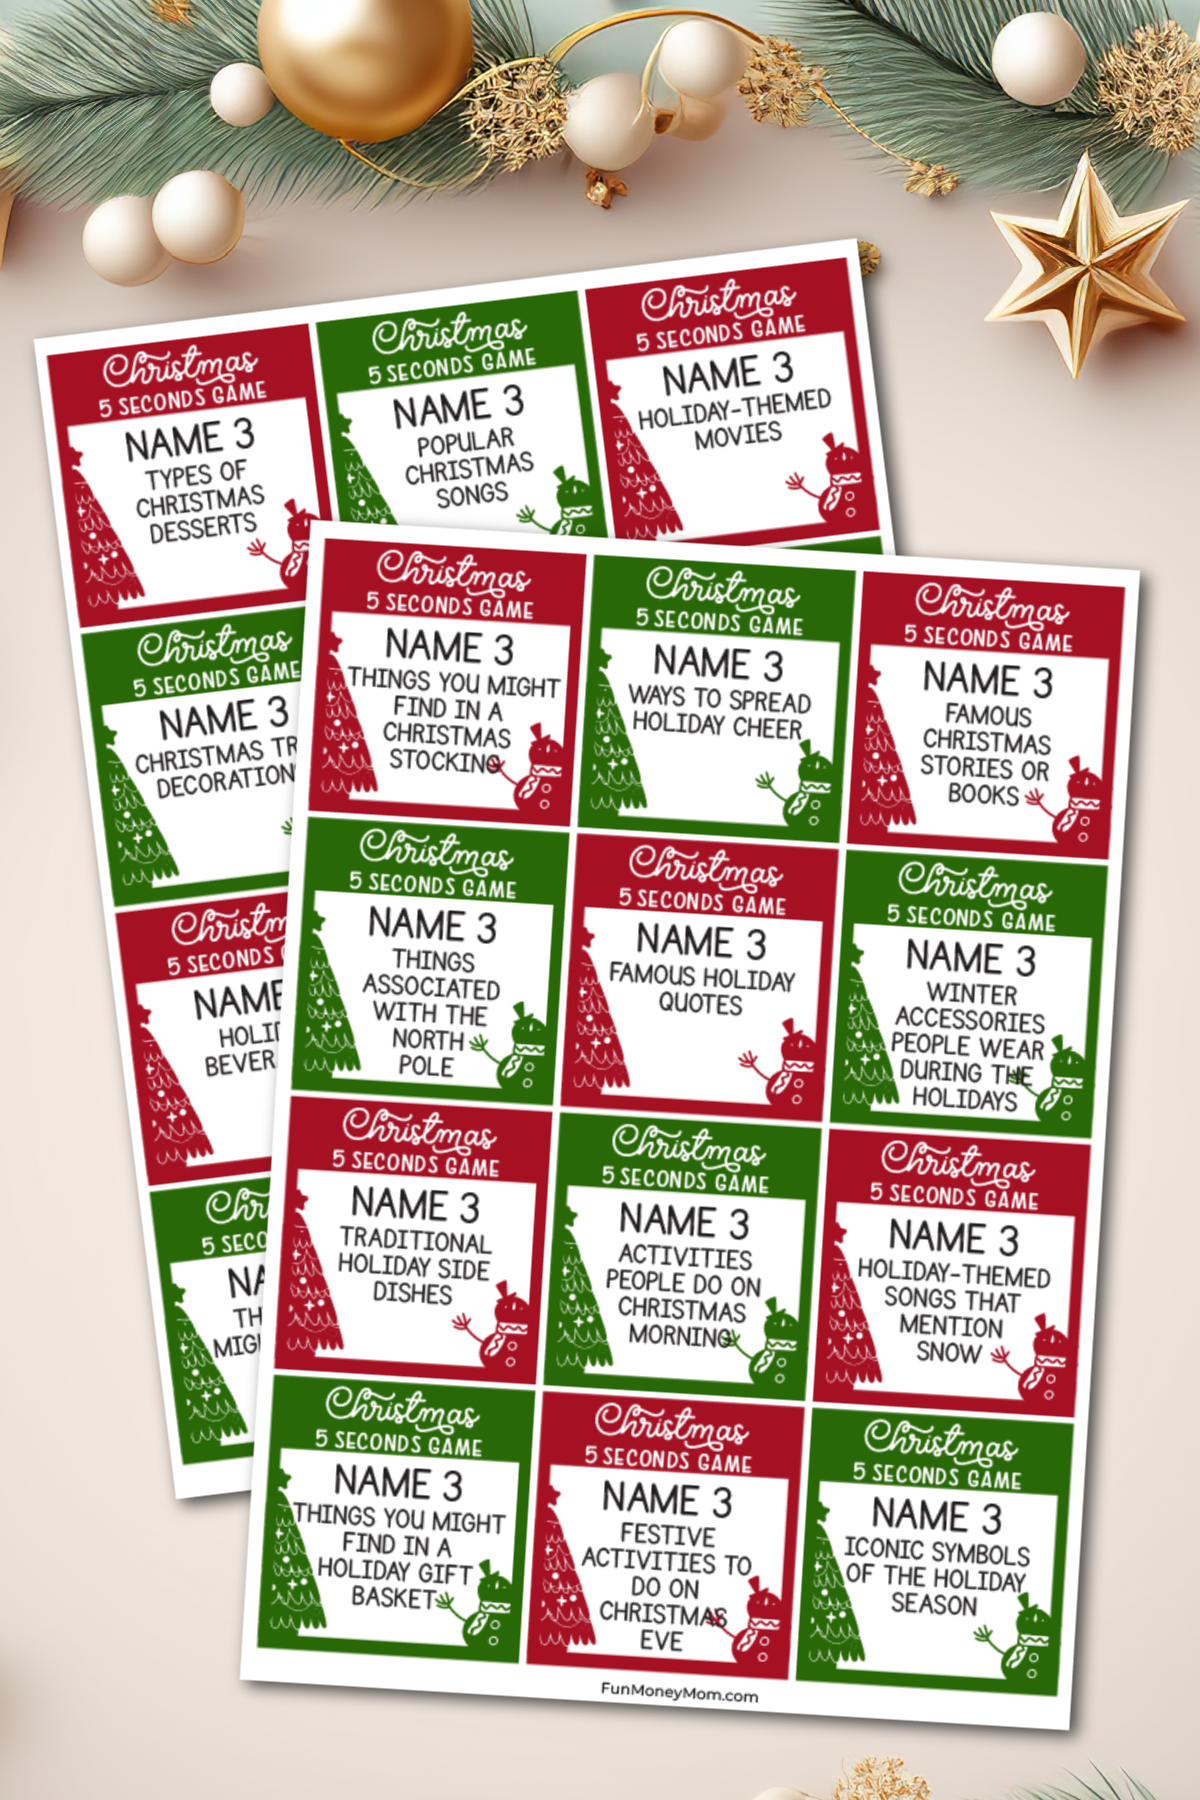 Printables for playing the Christmas 5 Seconds Game on Christmas background